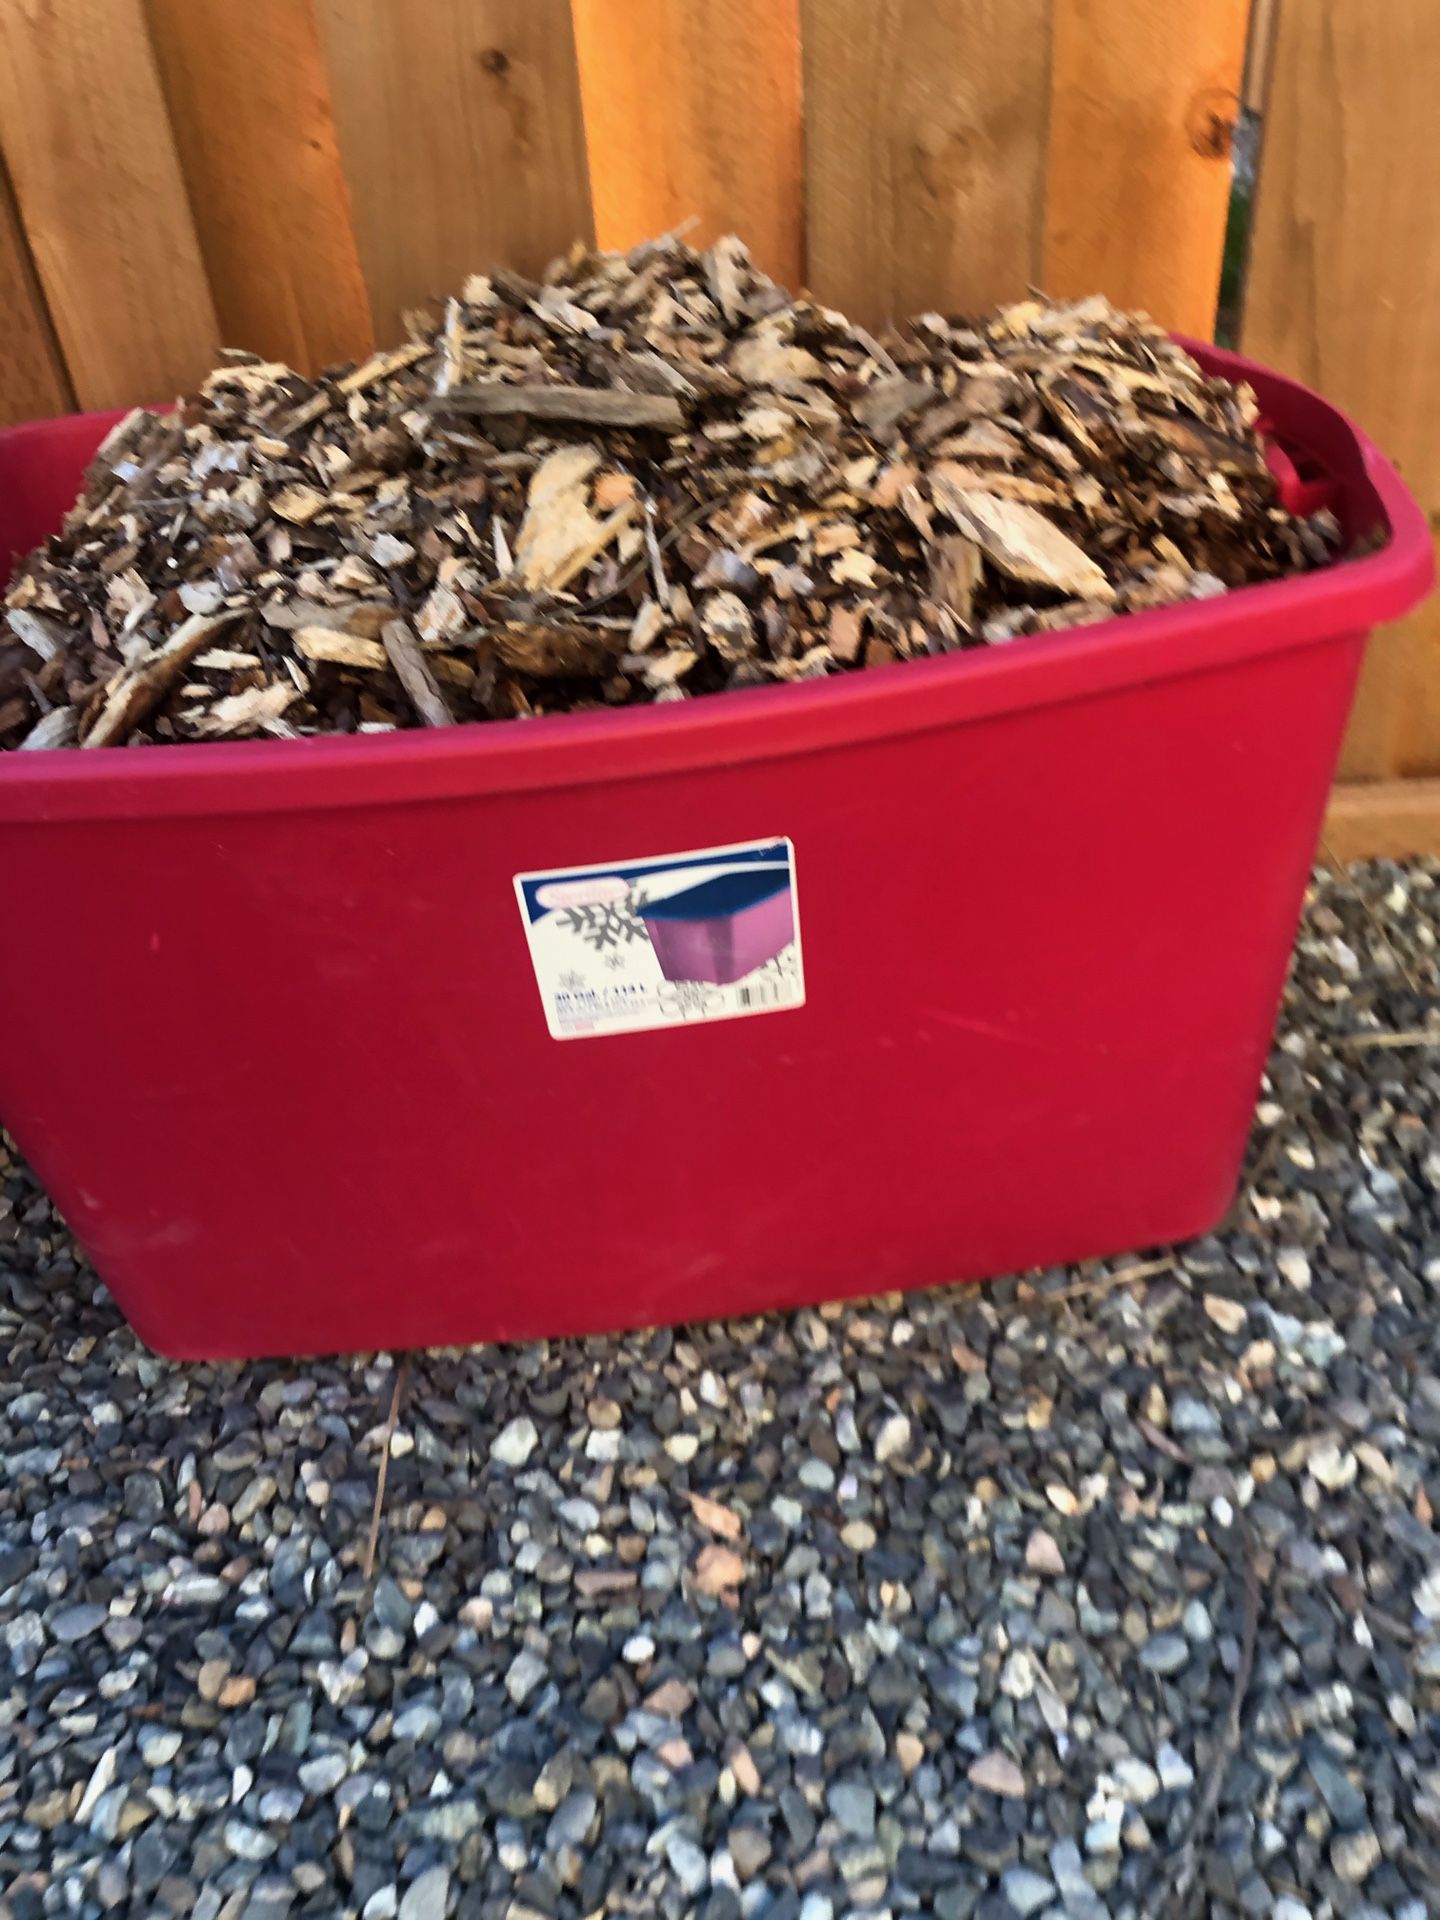 Free wood chips